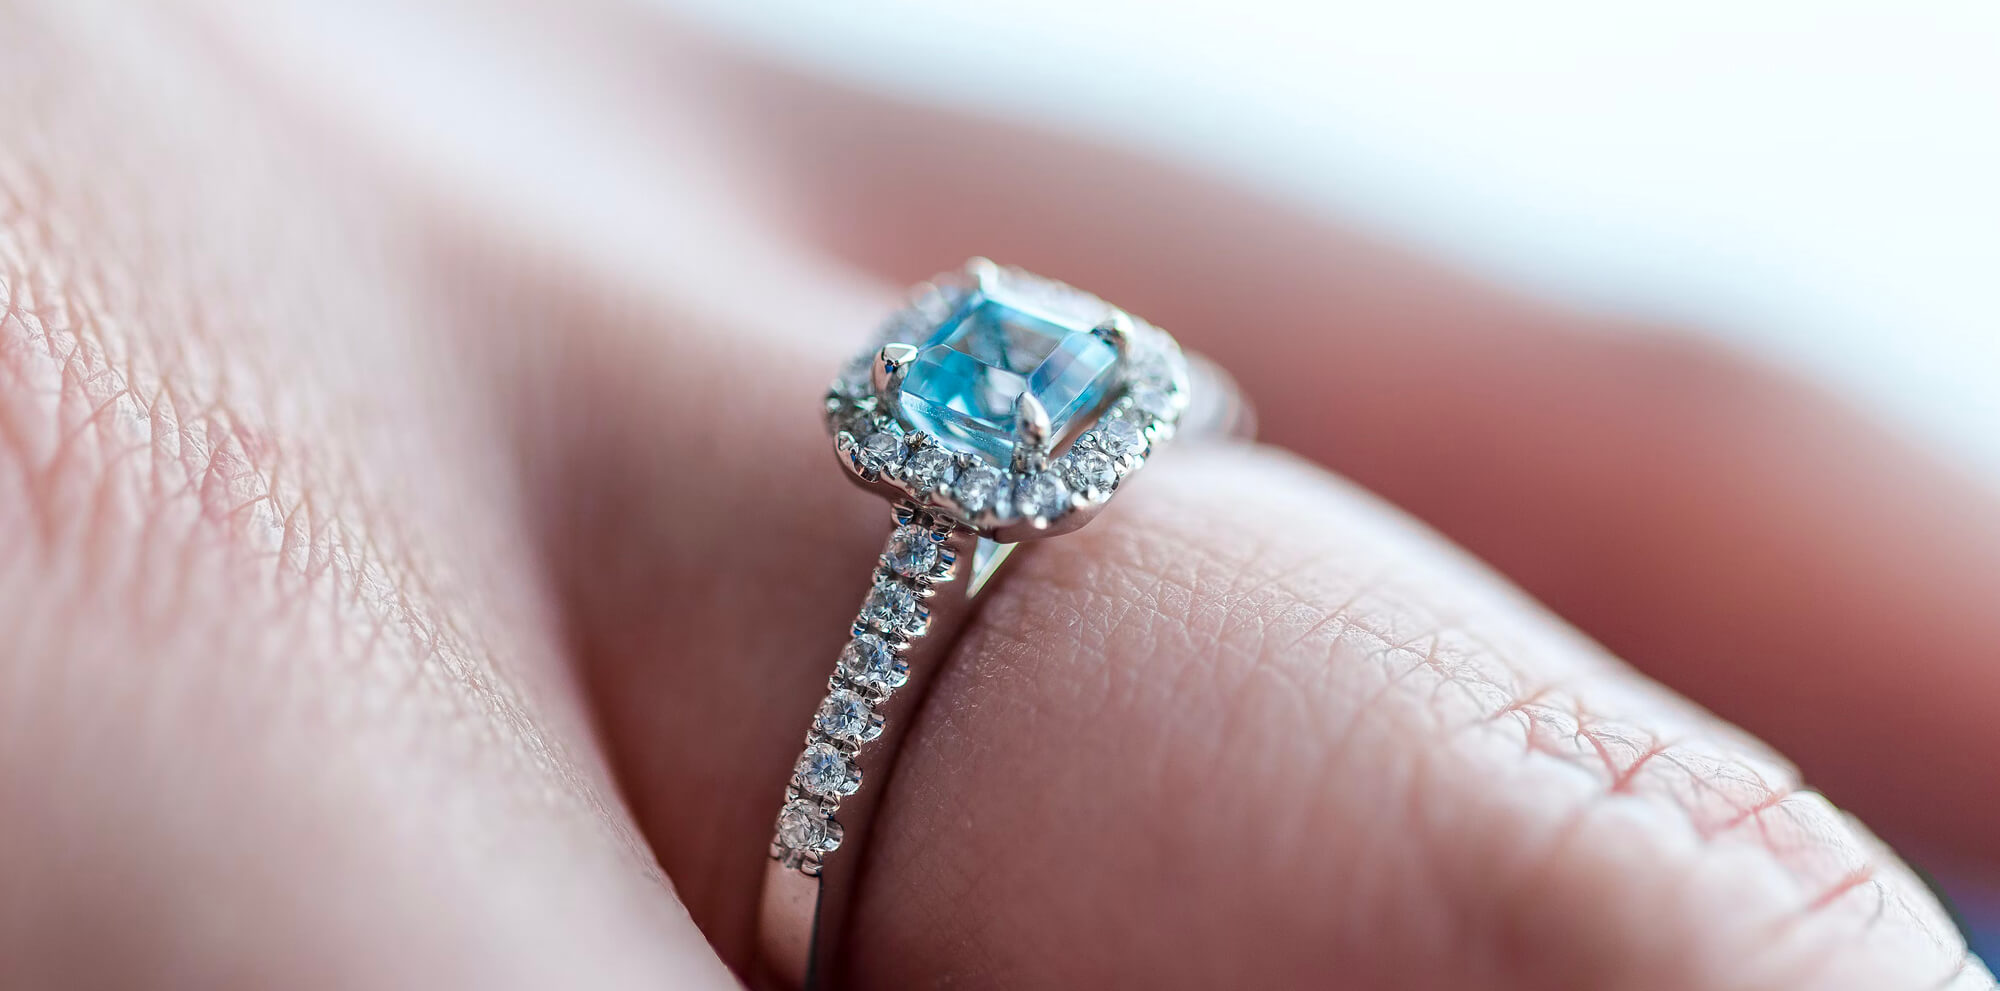 Aquamarine Jewellery and its Rise in Popularity